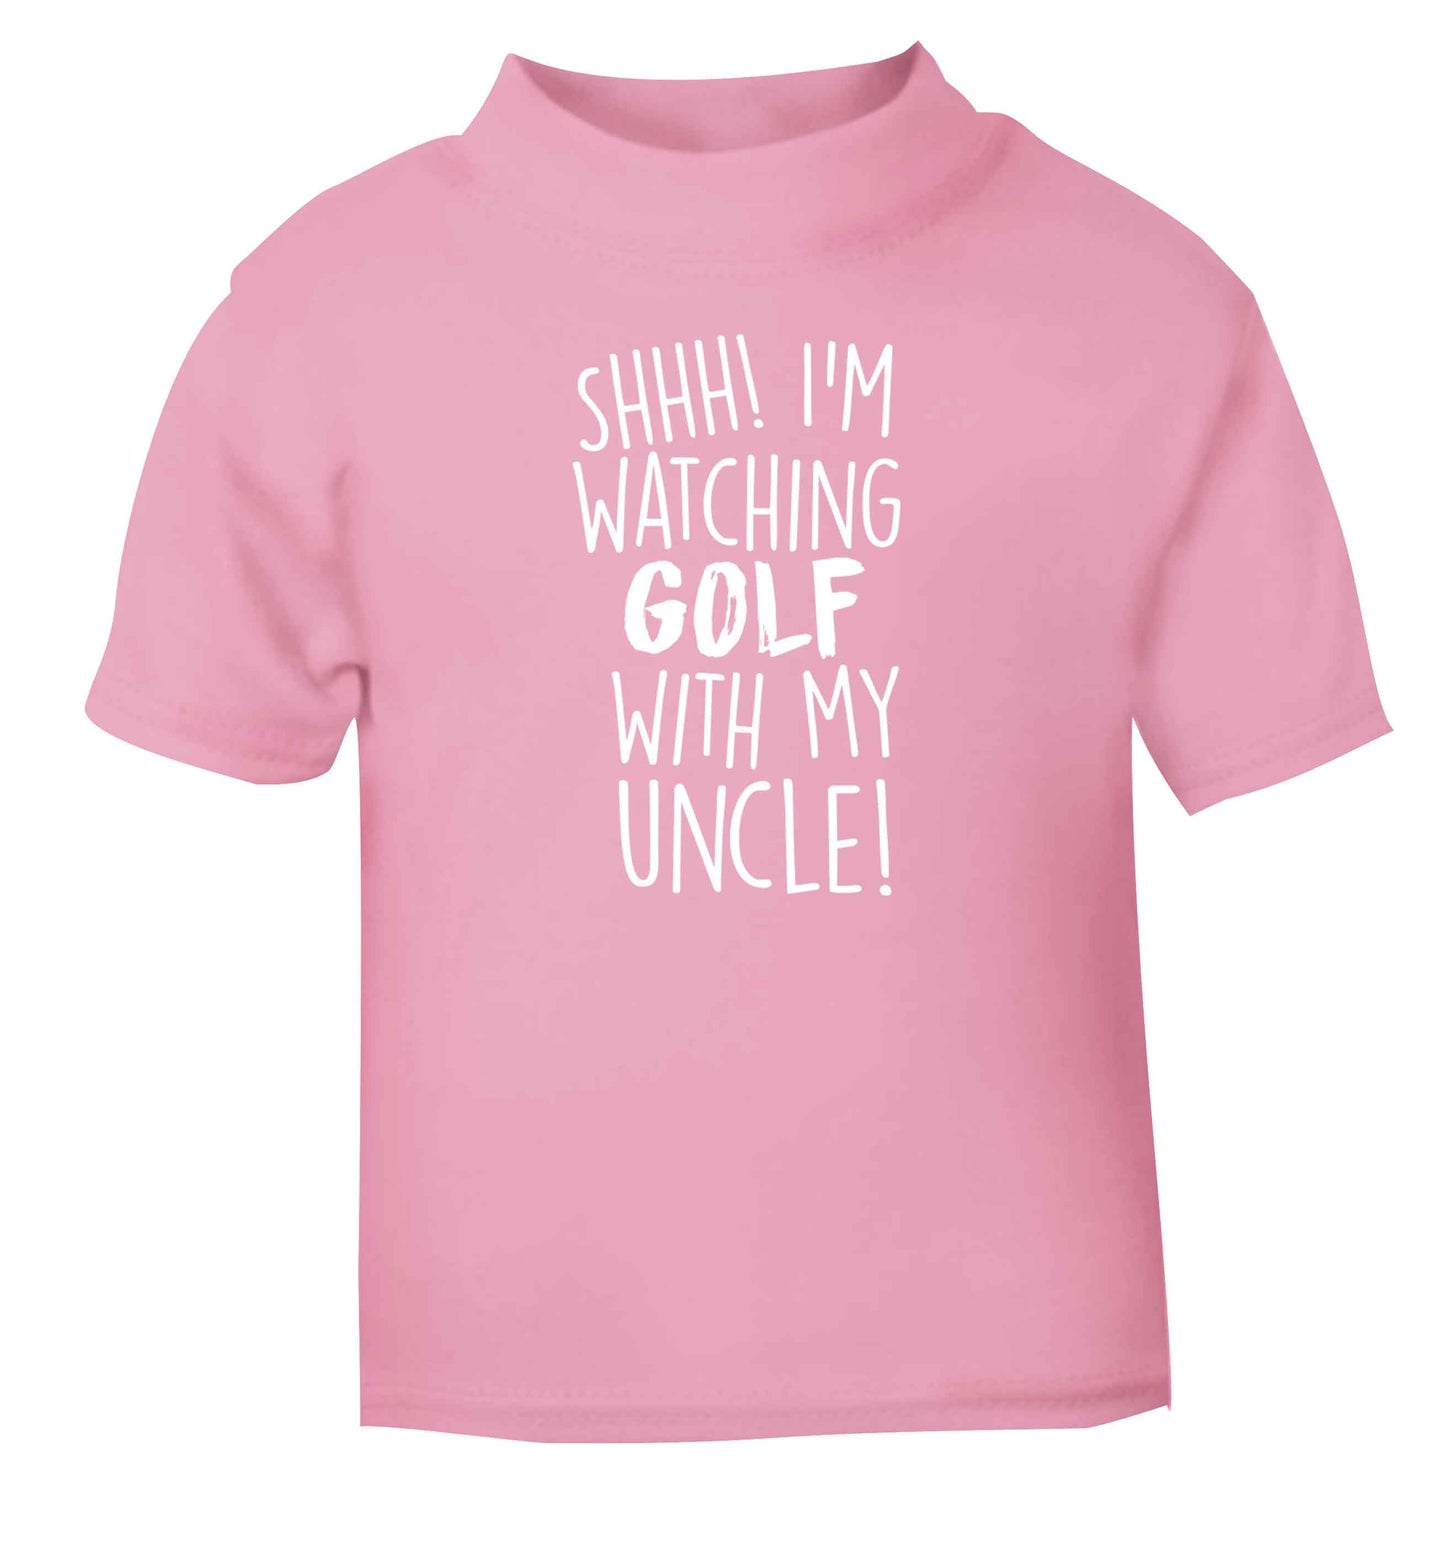 Shh I'm watching golf with my uncle light pink Baby Toddler Tshirt 2 Years